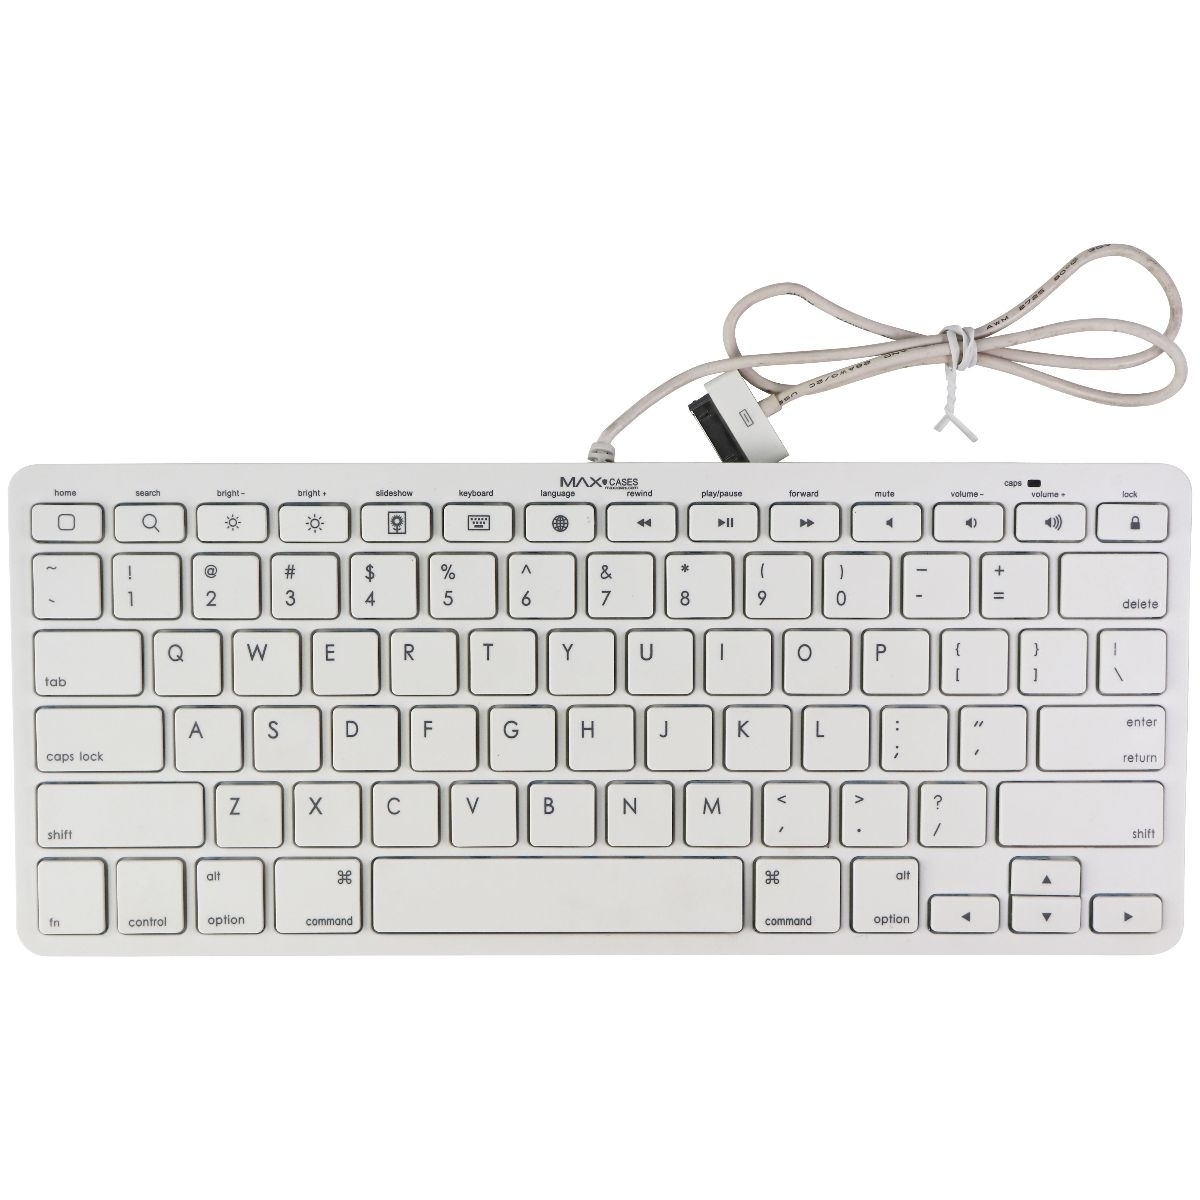 Max Cases (30-Pin) Wired Keyboard For Older Gen IPads 3/2/1 - White (PM9241)